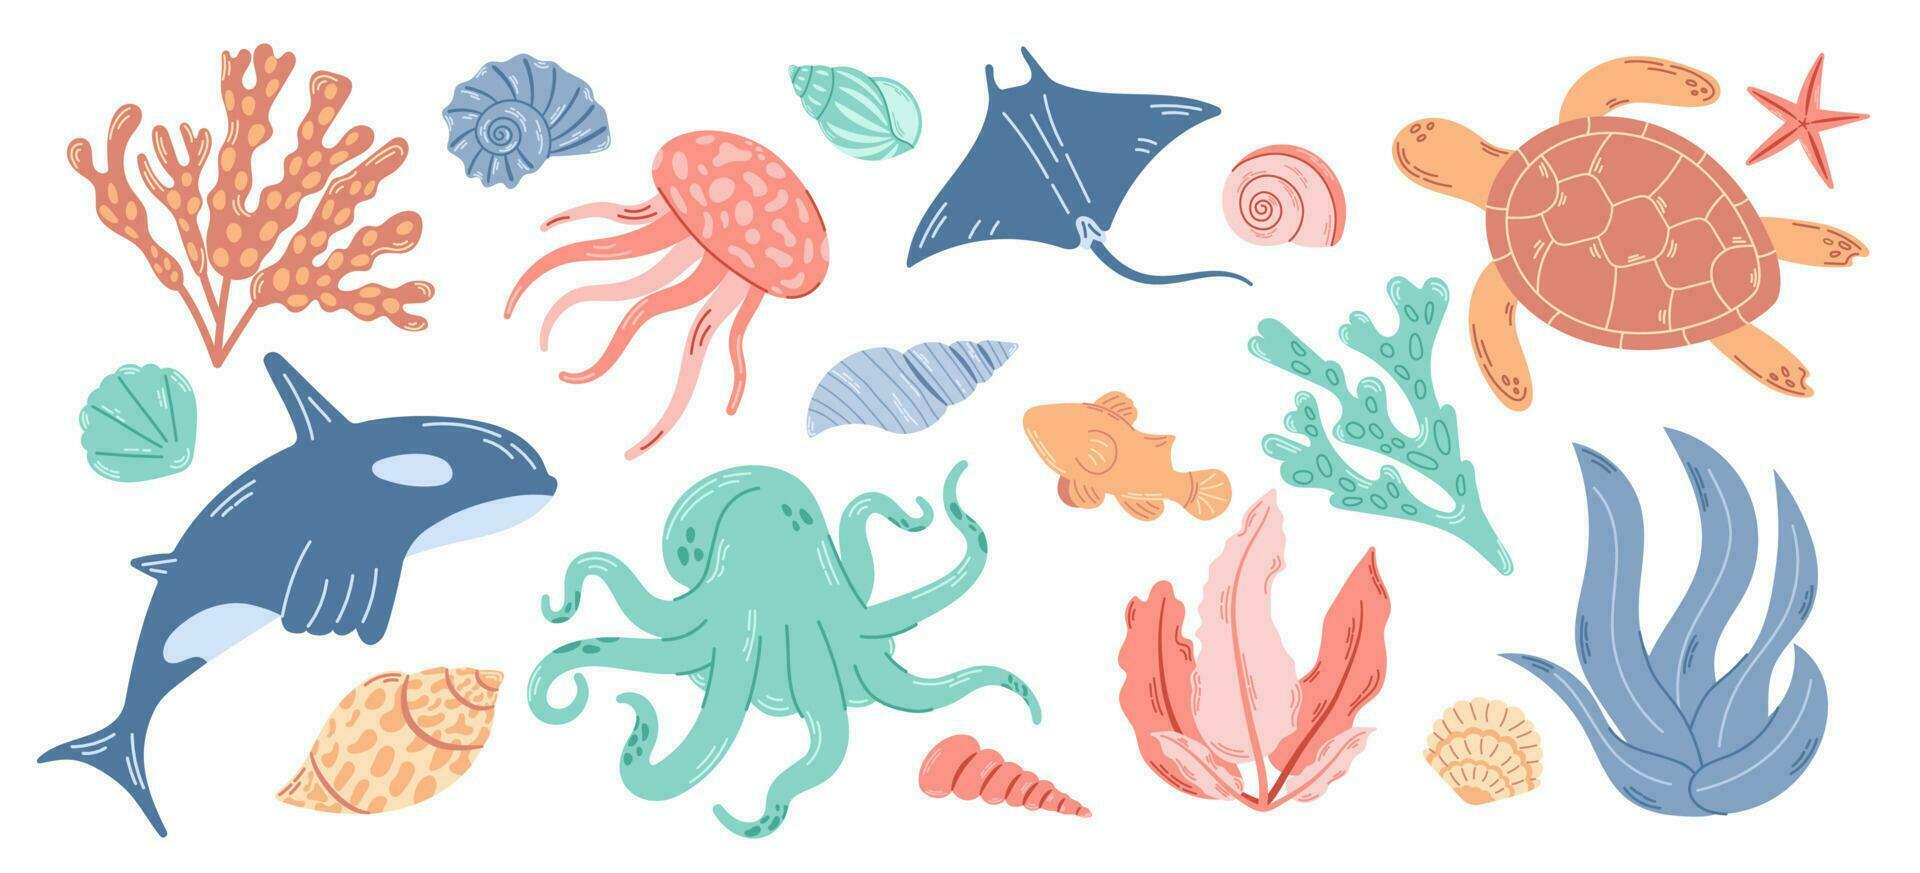 Group of sea animals and water plants. Underwater inhabitants set. Modern hand drawn flat illustration on white background. vector